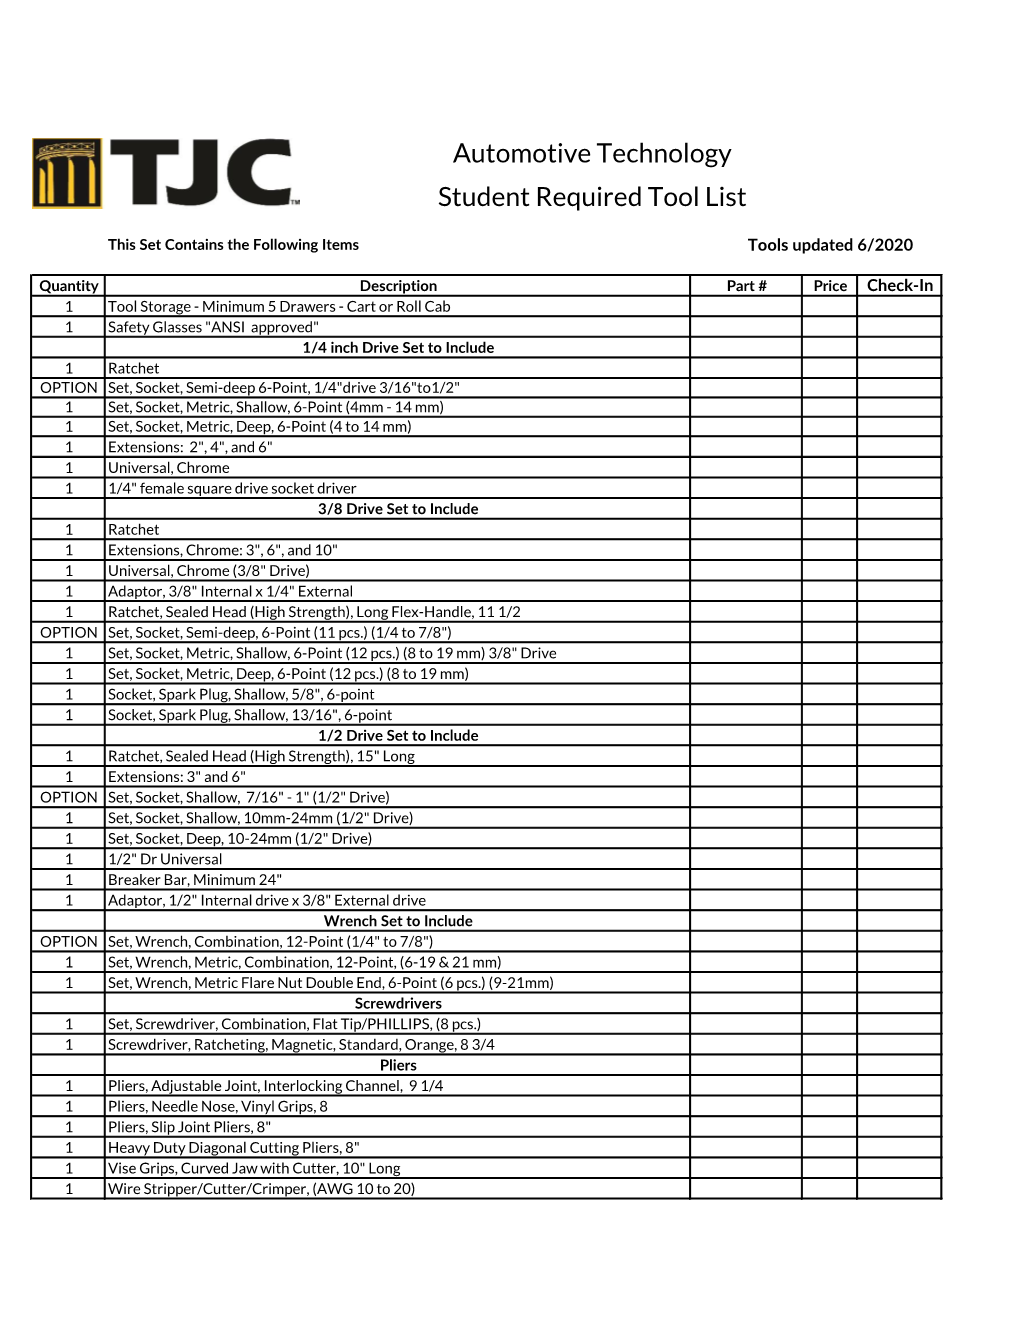 Automotive Technology Student Required Tool List